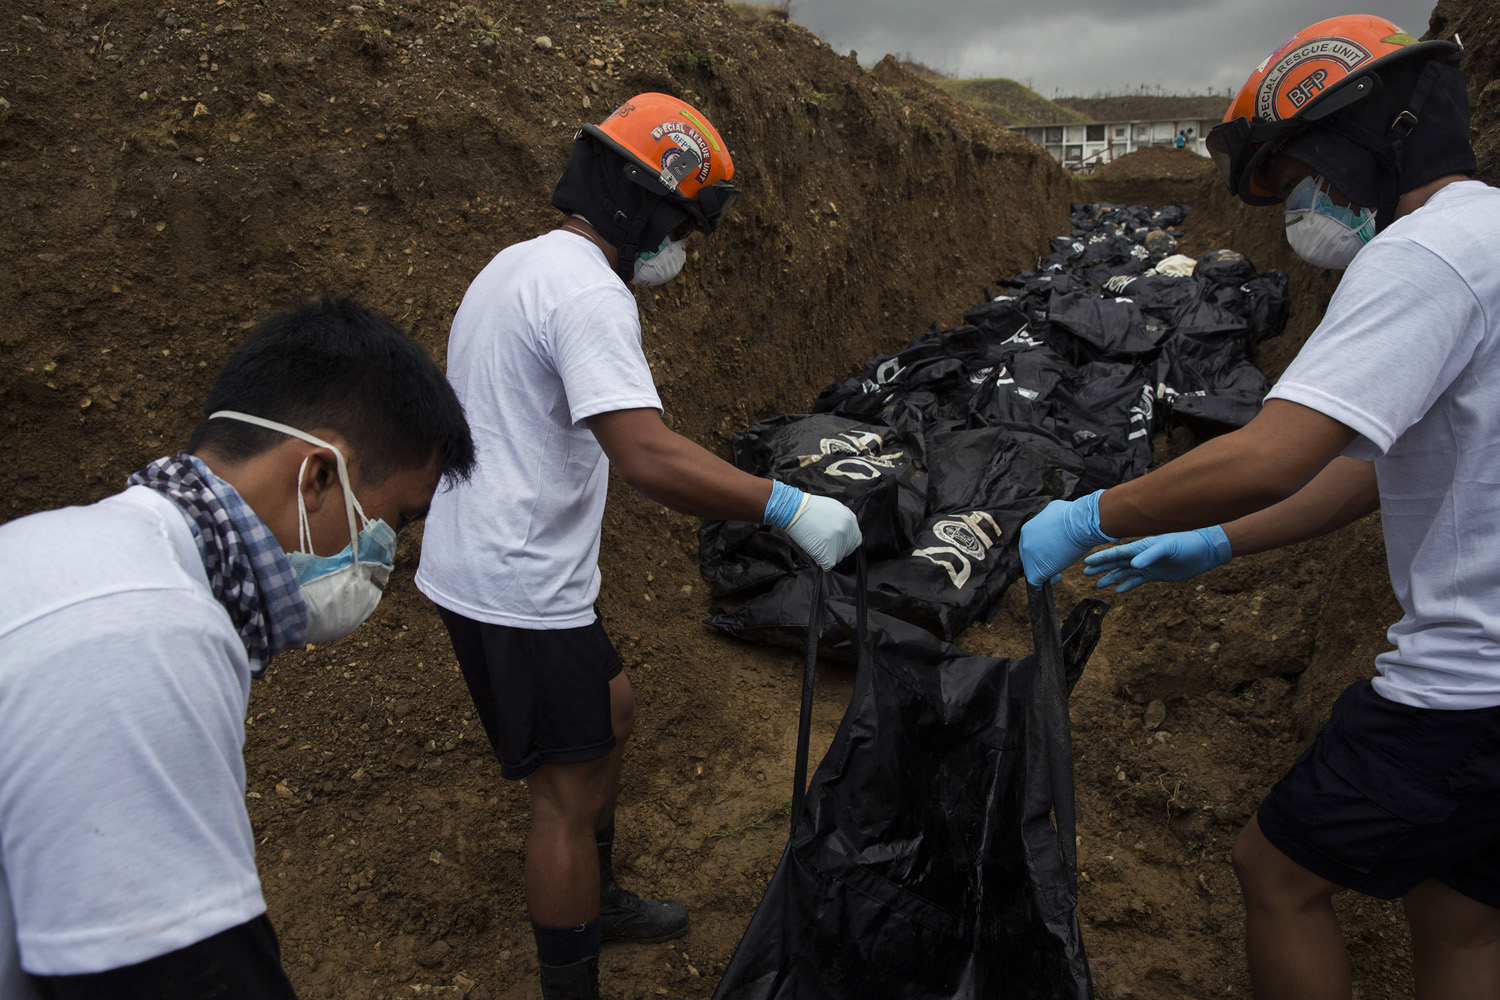 Rescue workers load body bags of people killed by Haiyan Typhoon into a mass grave in Tacloban, The Philippines on November 16, 2013.